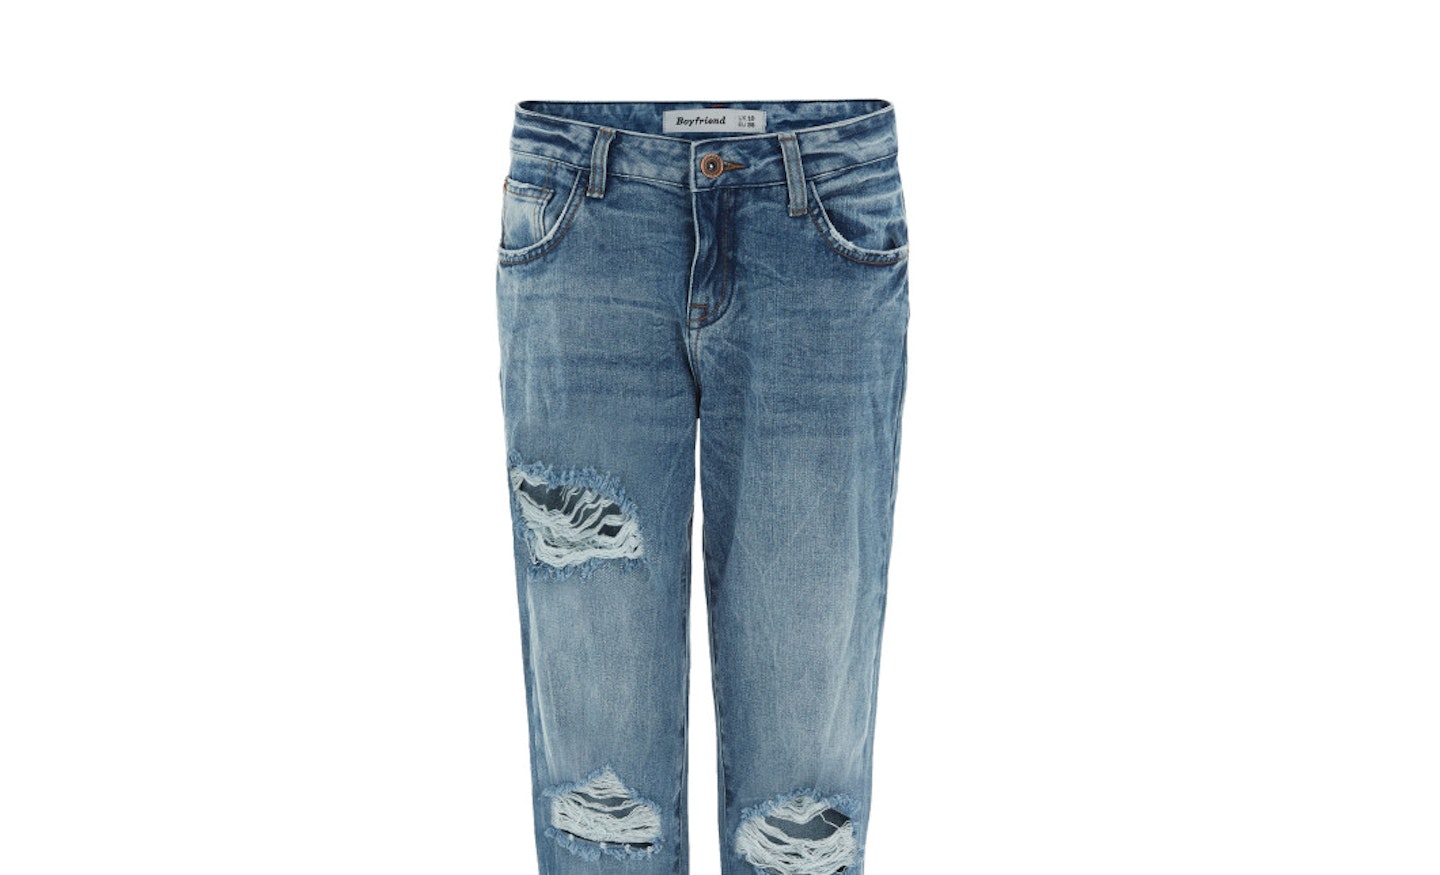 jeans-331791945